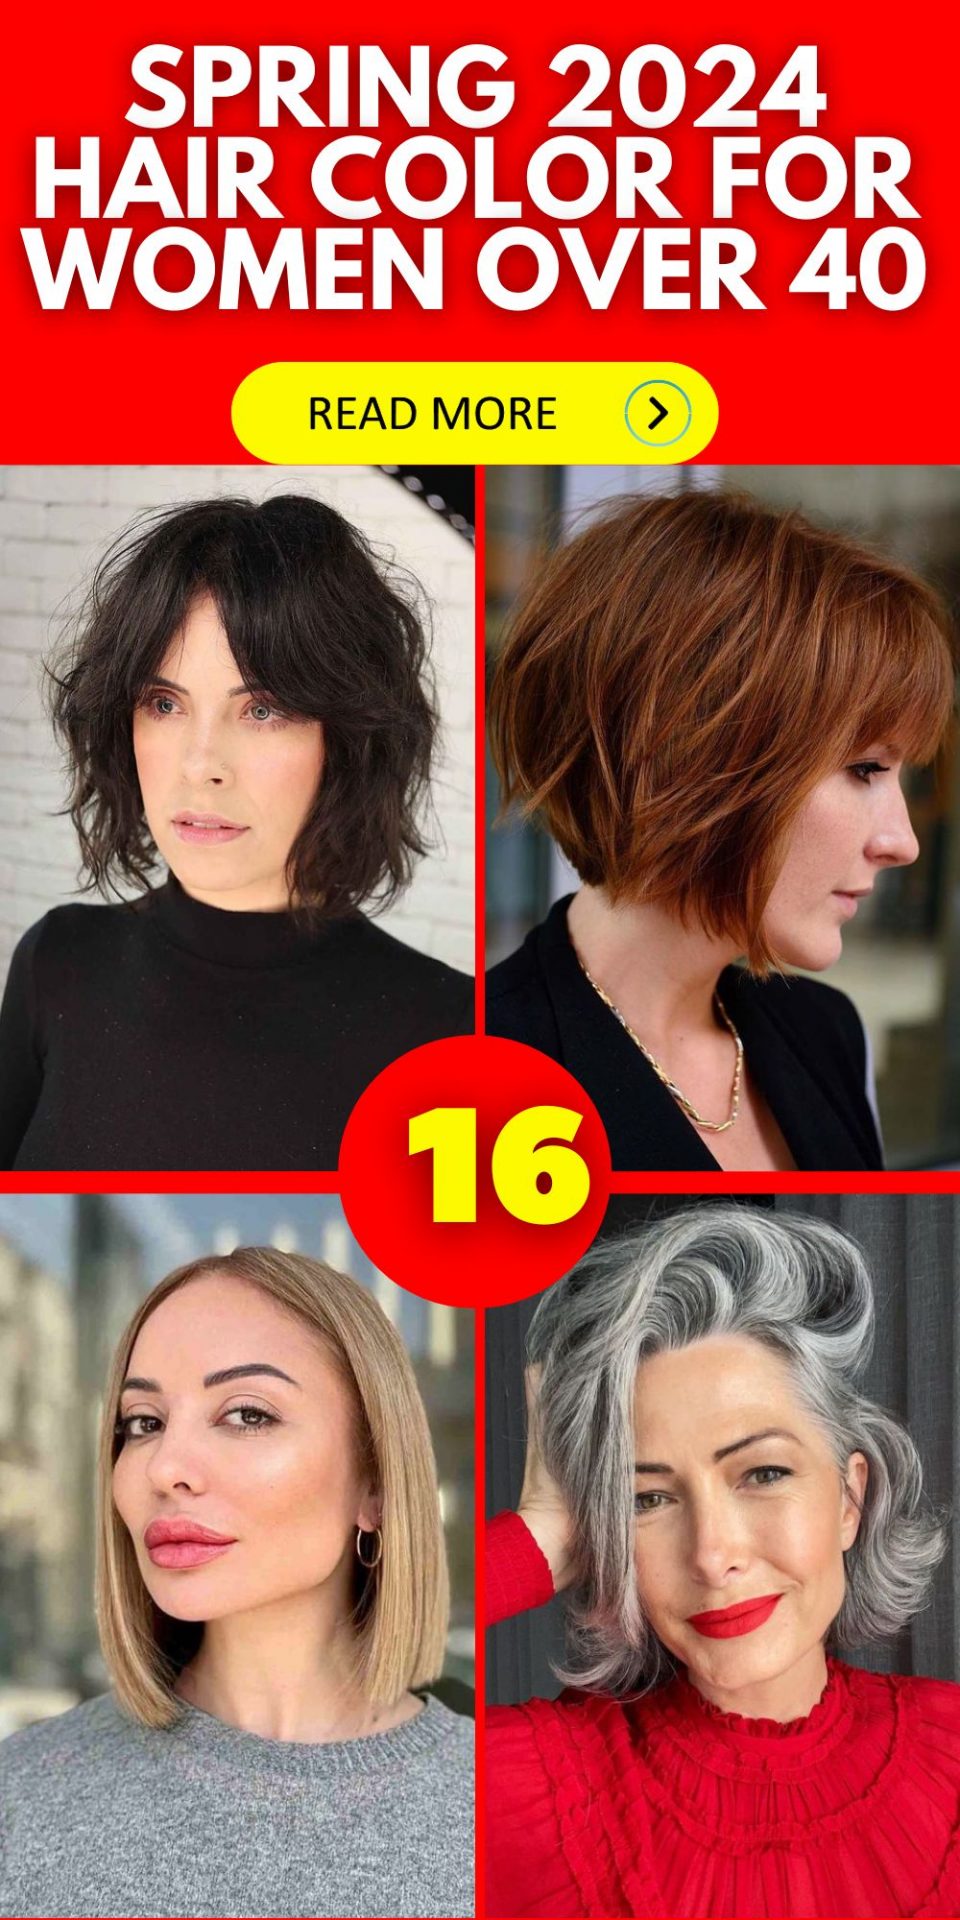 Embrace the Spring 2024 Hair Color Trends for Women Aged 40 and Beyond